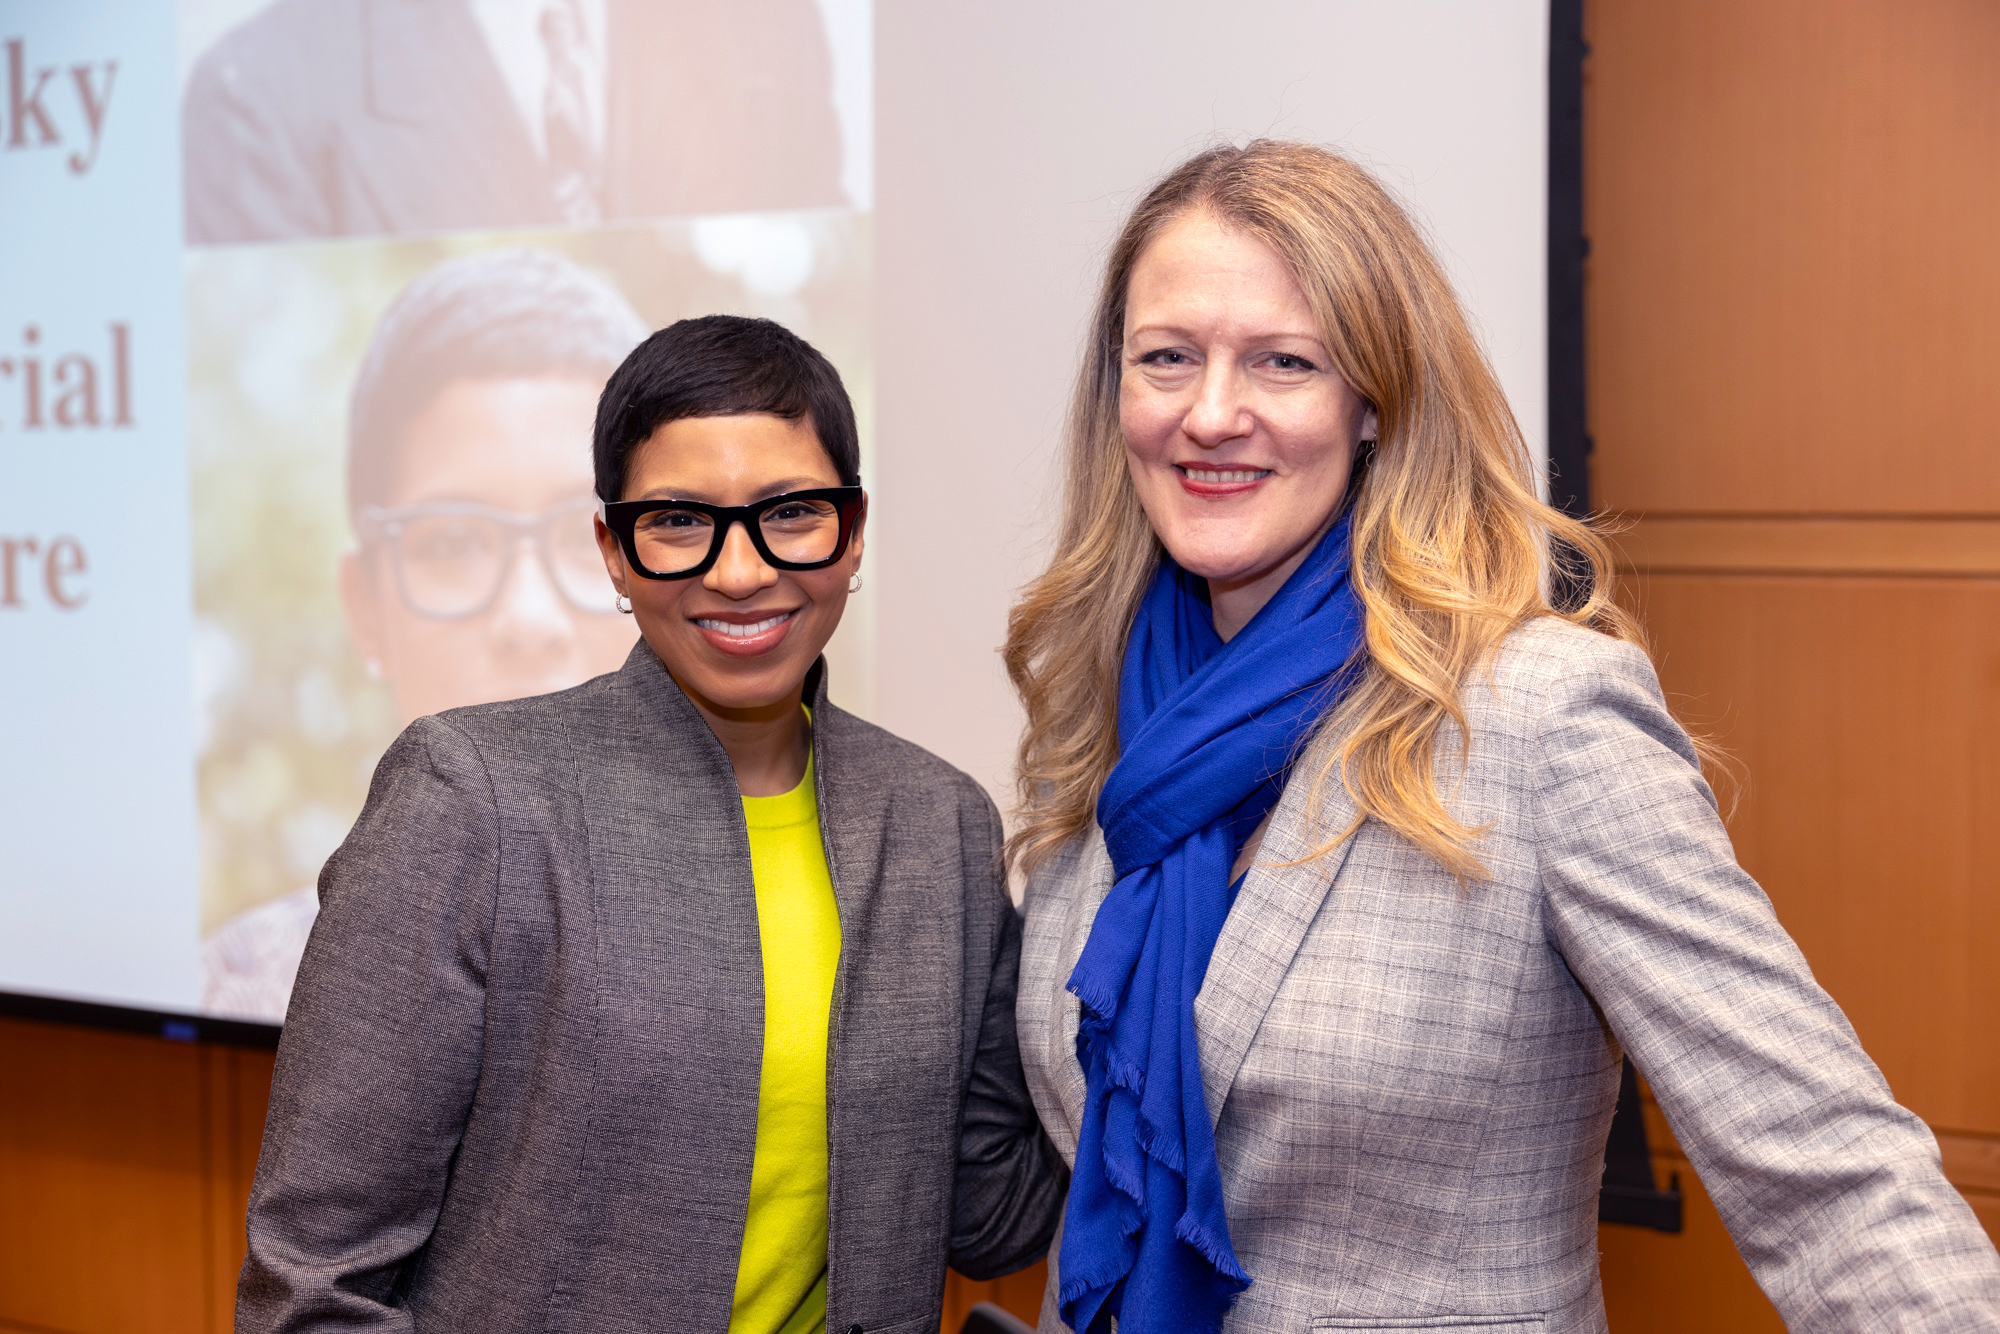 MSNBC legal analyst Melissa Murray, pictured here with Michelle J. Anderson, delivered the Samuel J. Konefsky Memorial Lecture, "Dobbs, Democracy and Distrust" on campus in the fall. 